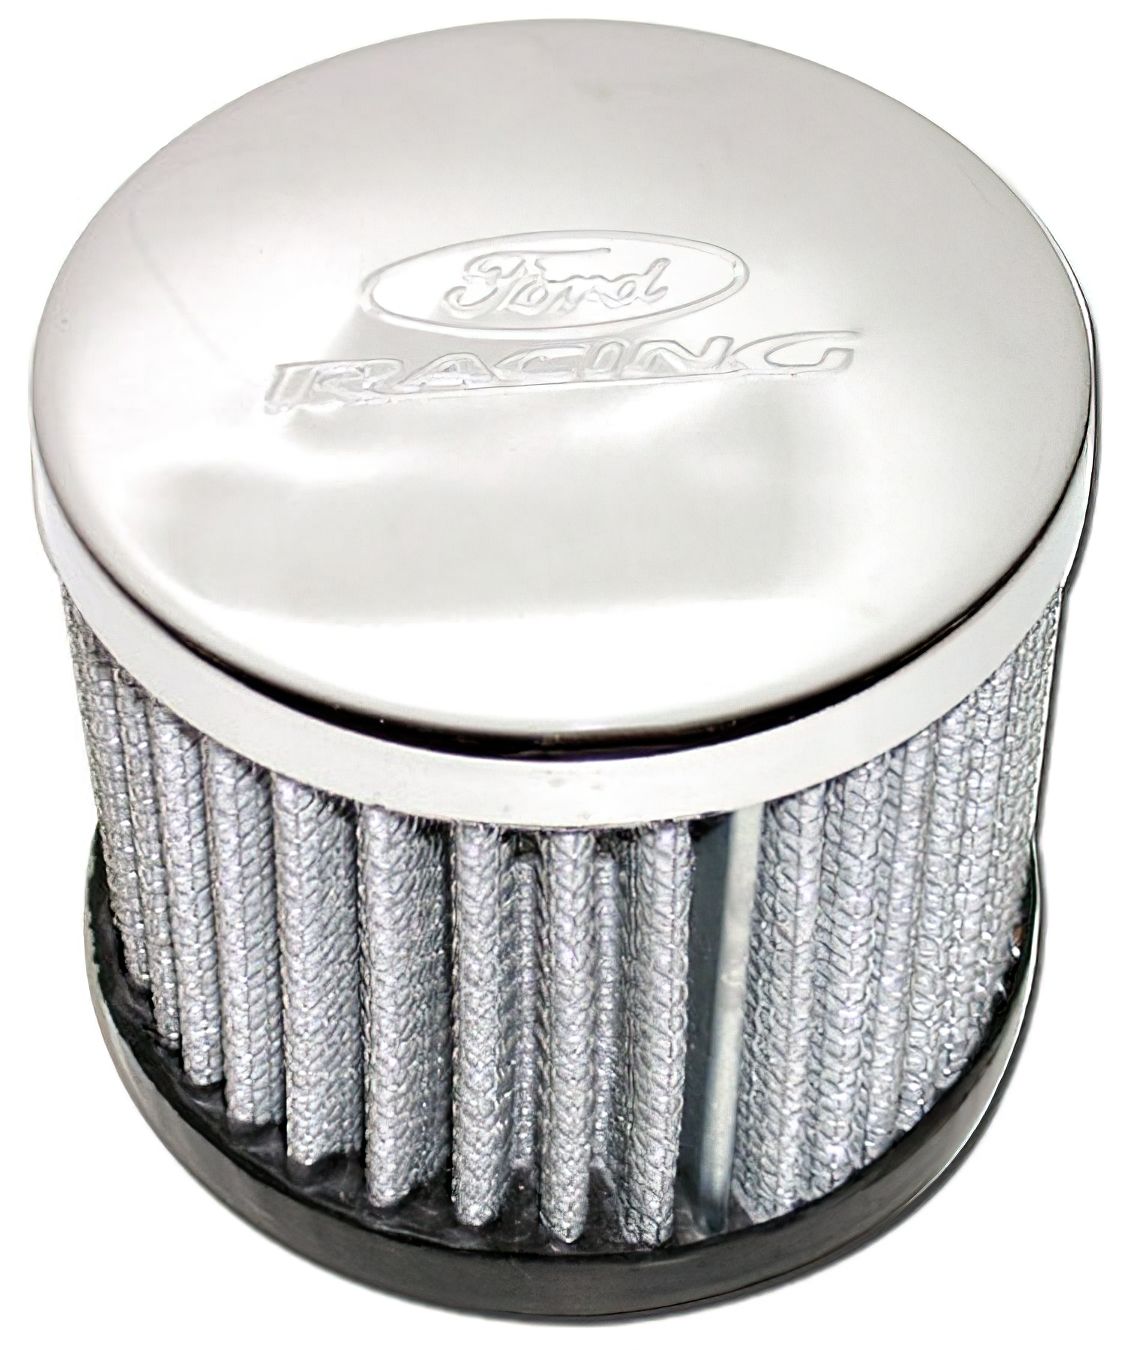 Ford Performance Air Cleaner Aluminum Oval With Cobra Script Mustang V8 4V  1965-1973